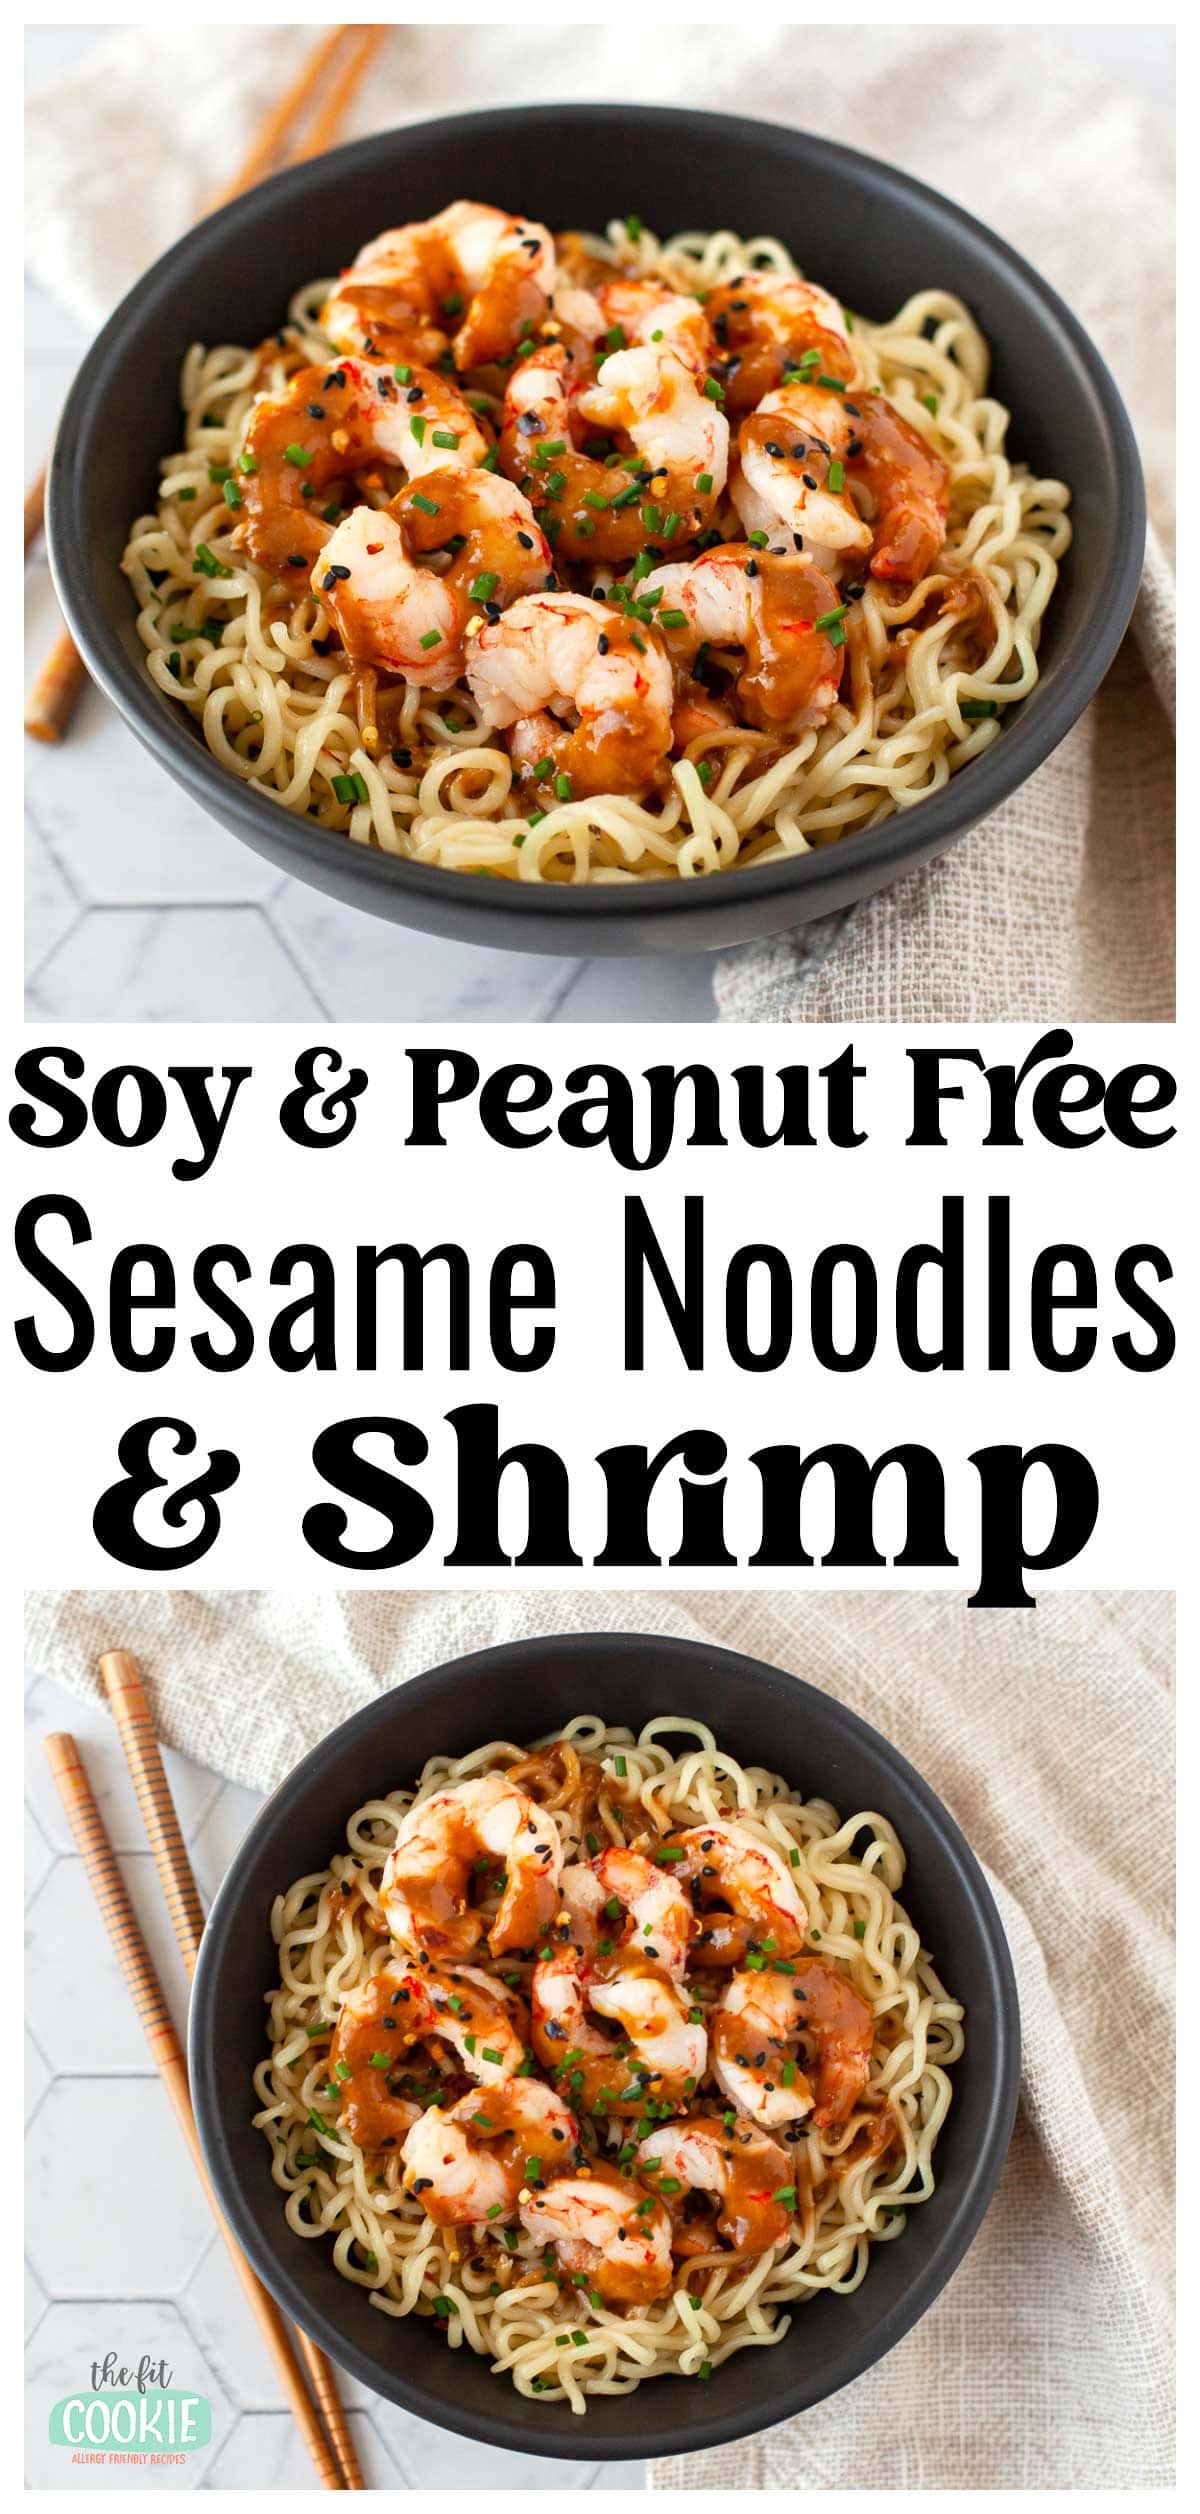 photo collage of sesame shrimp and noodles in a black bowl with text overlay. 